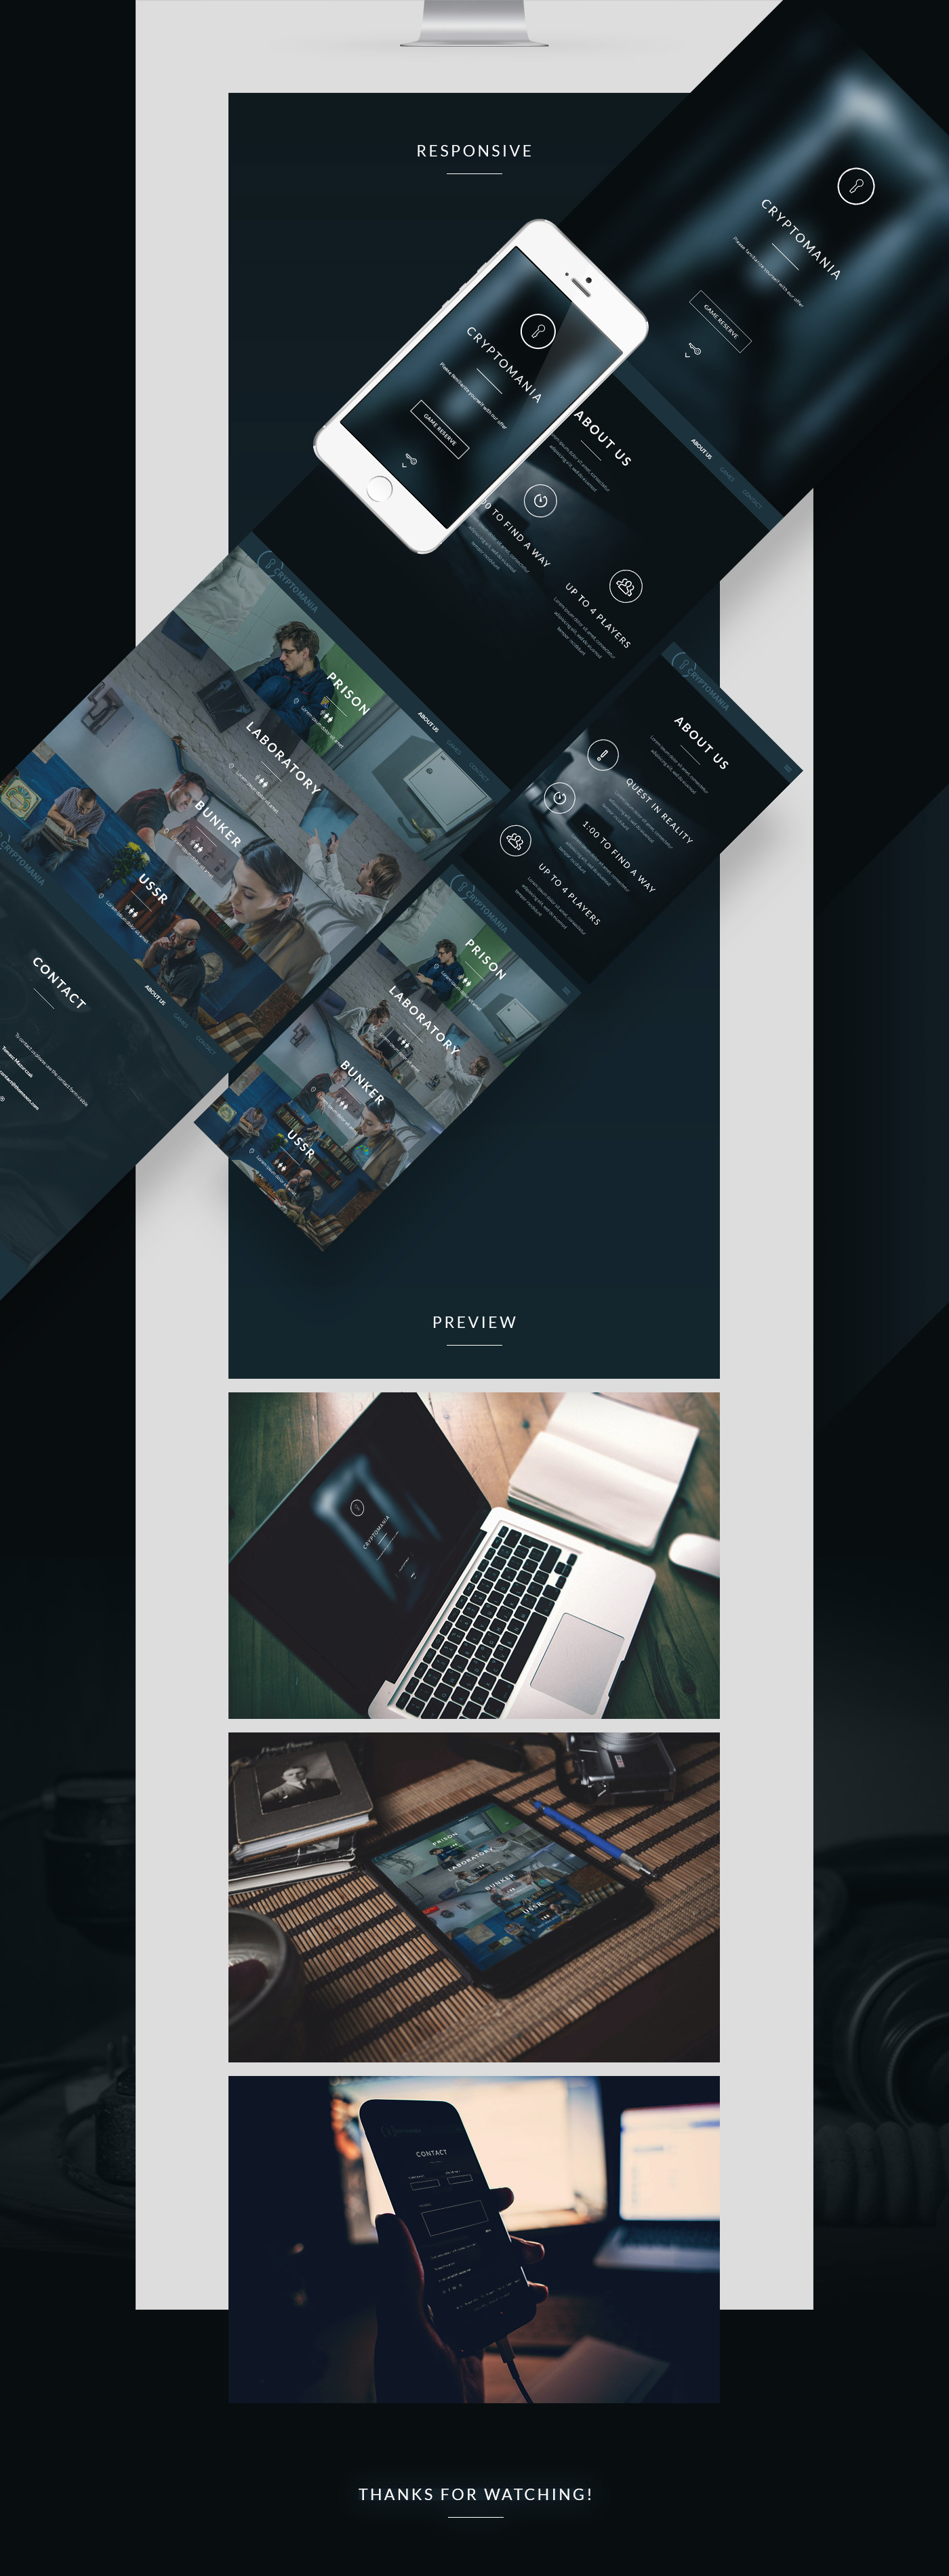 Web site outline parallax Responsive modern template design promo landing page